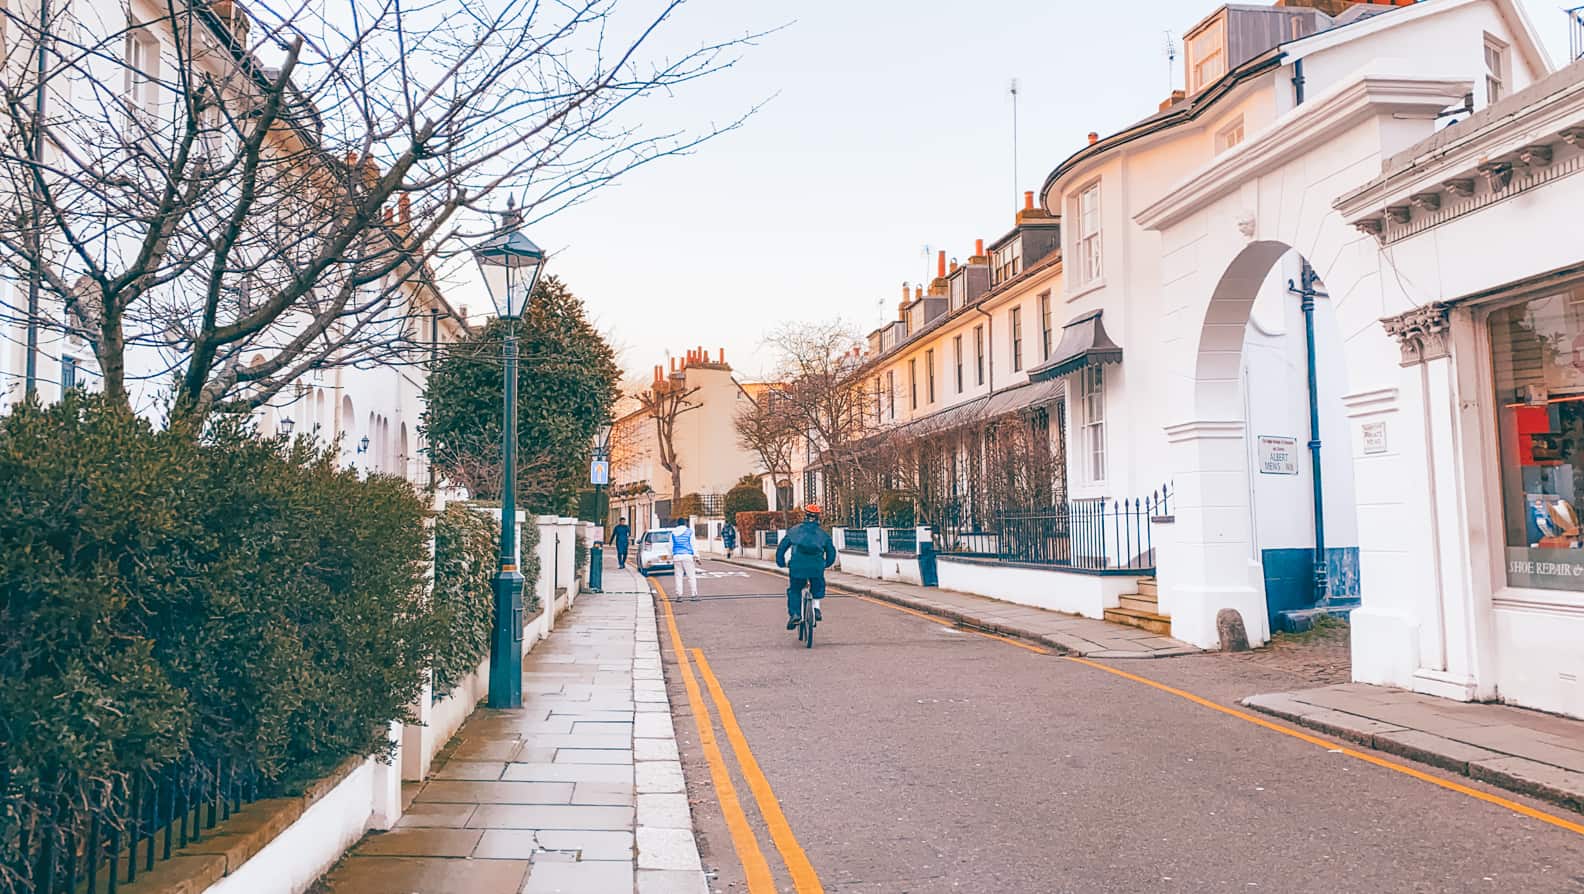 Things to do in Kensington, London: from pretty streets to hidden gems